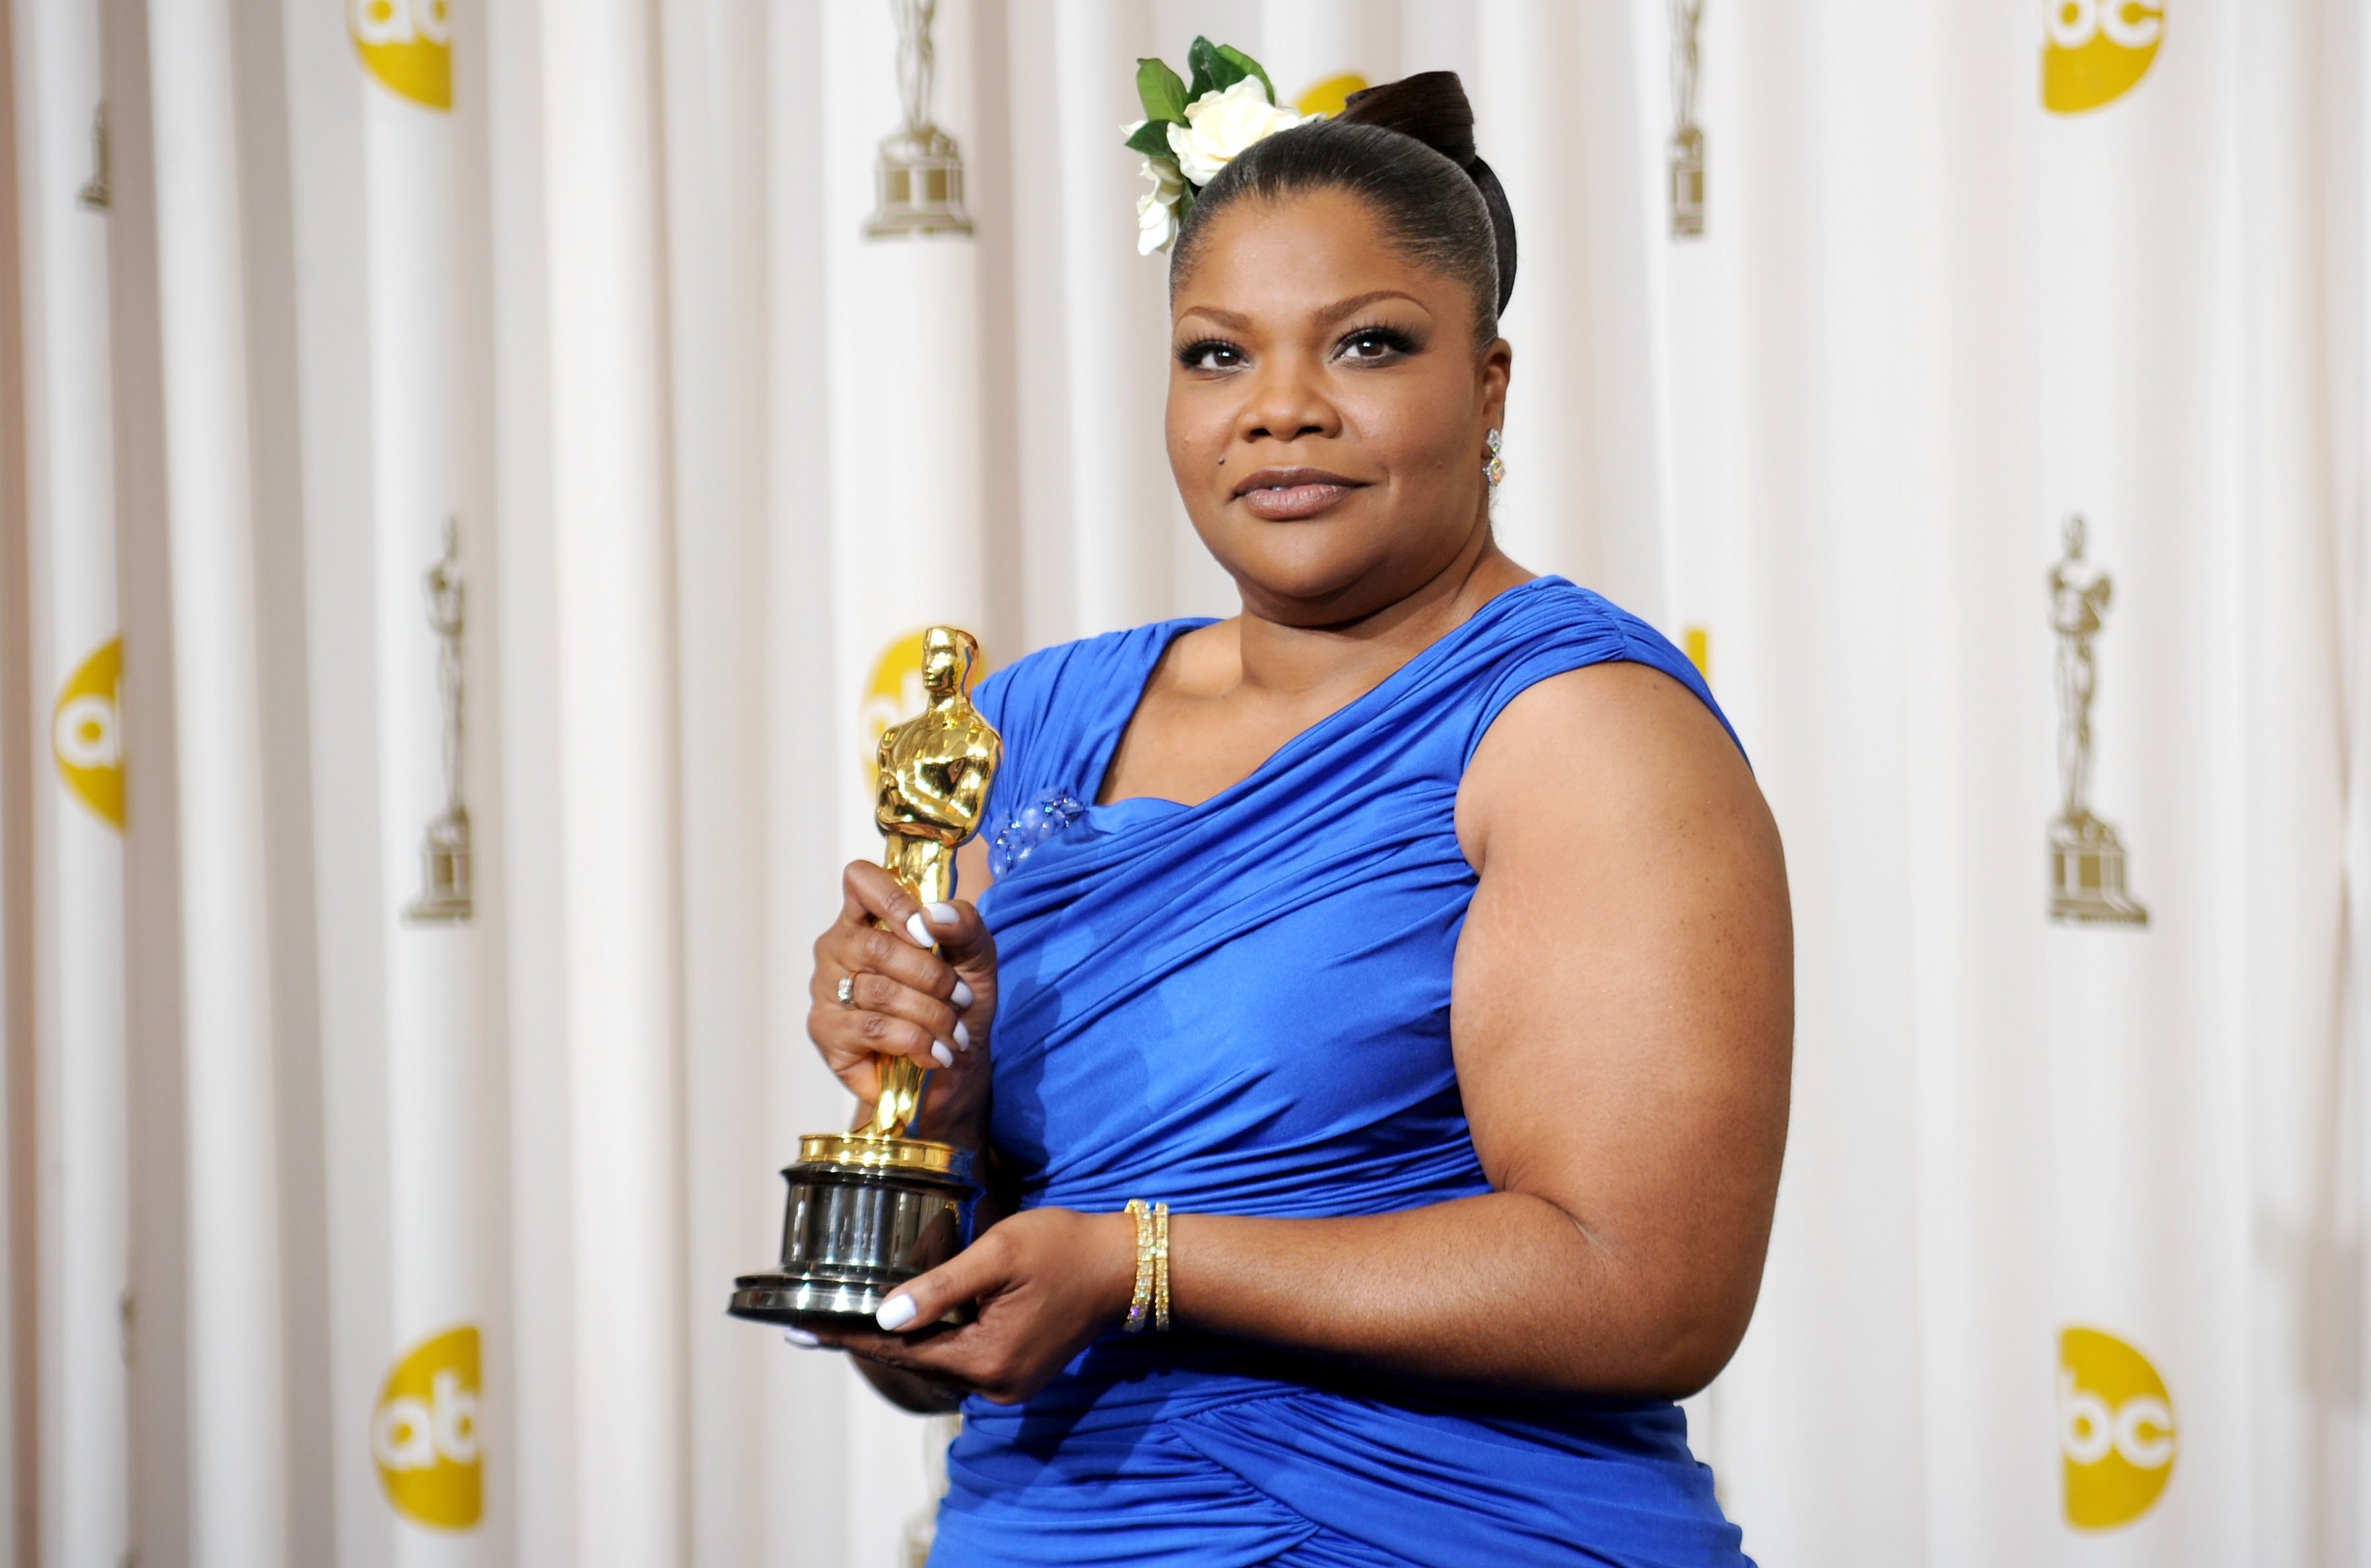 Actress Mo'Nique, winner of the Best Supporting Actress award for "Precious” at the 82nd Annual Academy Awards held at Kodak Theatre on March 7, 2010 in Hollywood, California. | Source: Getty Images